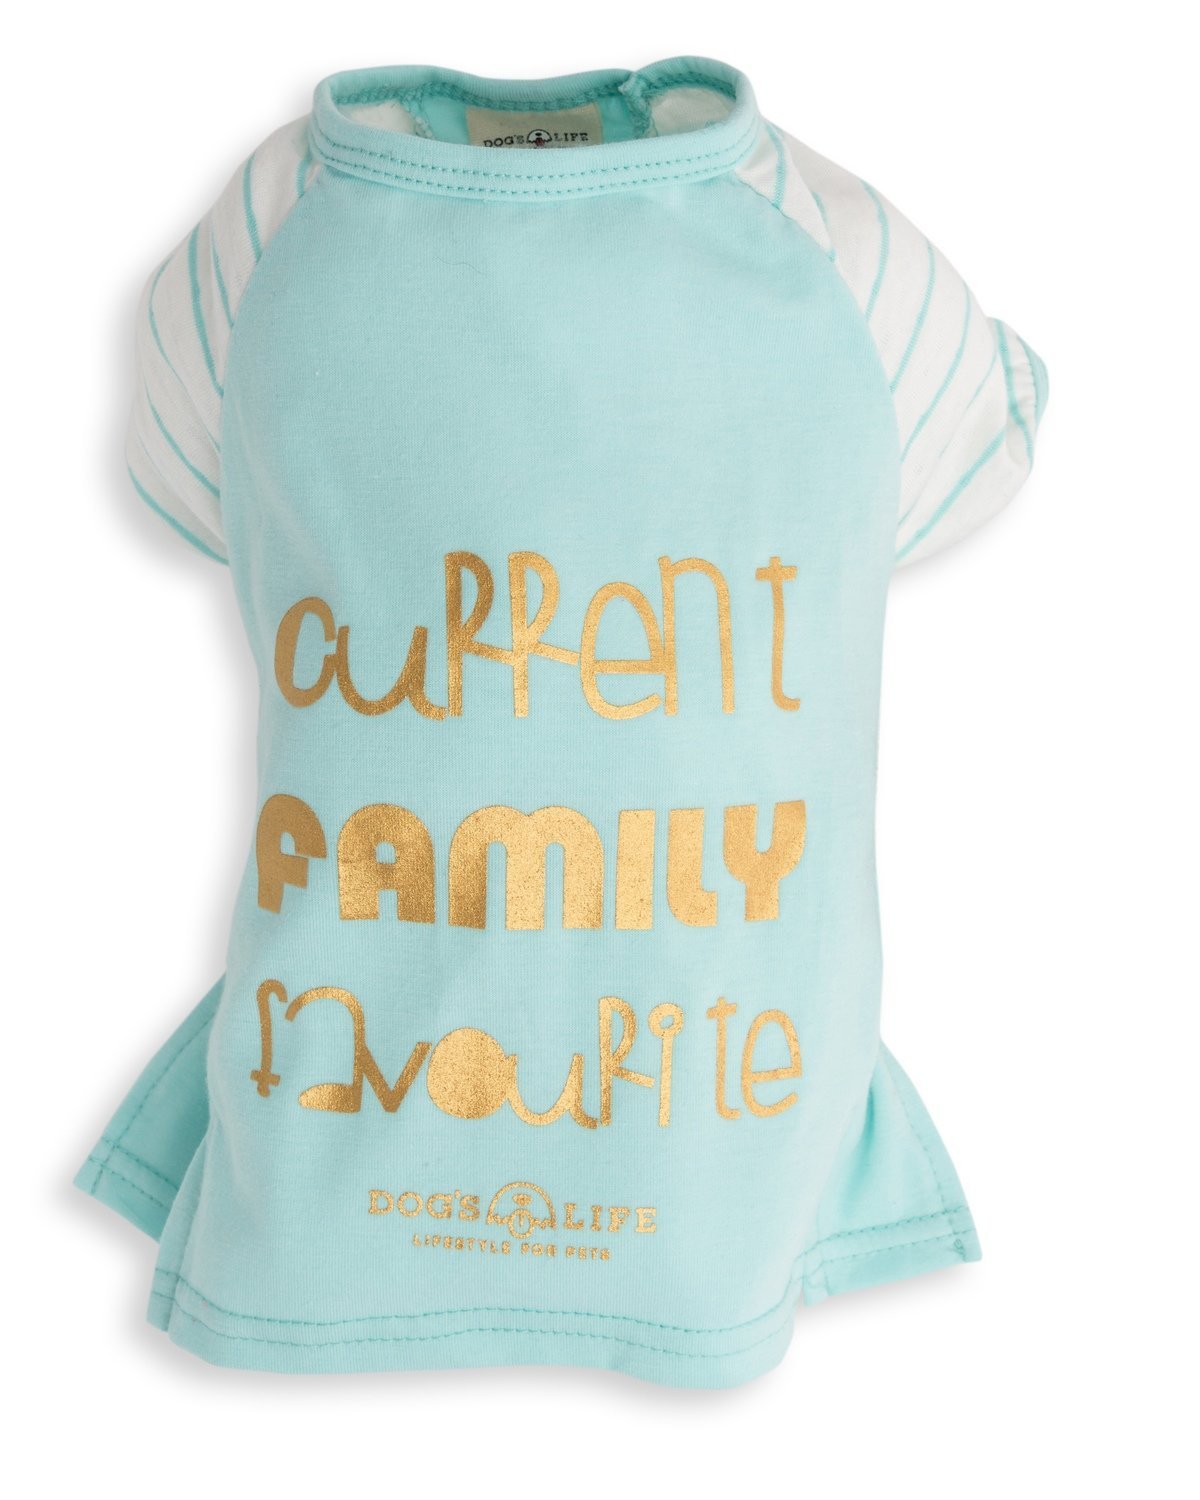 Dog's Life Current Family Favourite Tee Turquoise - Clothing